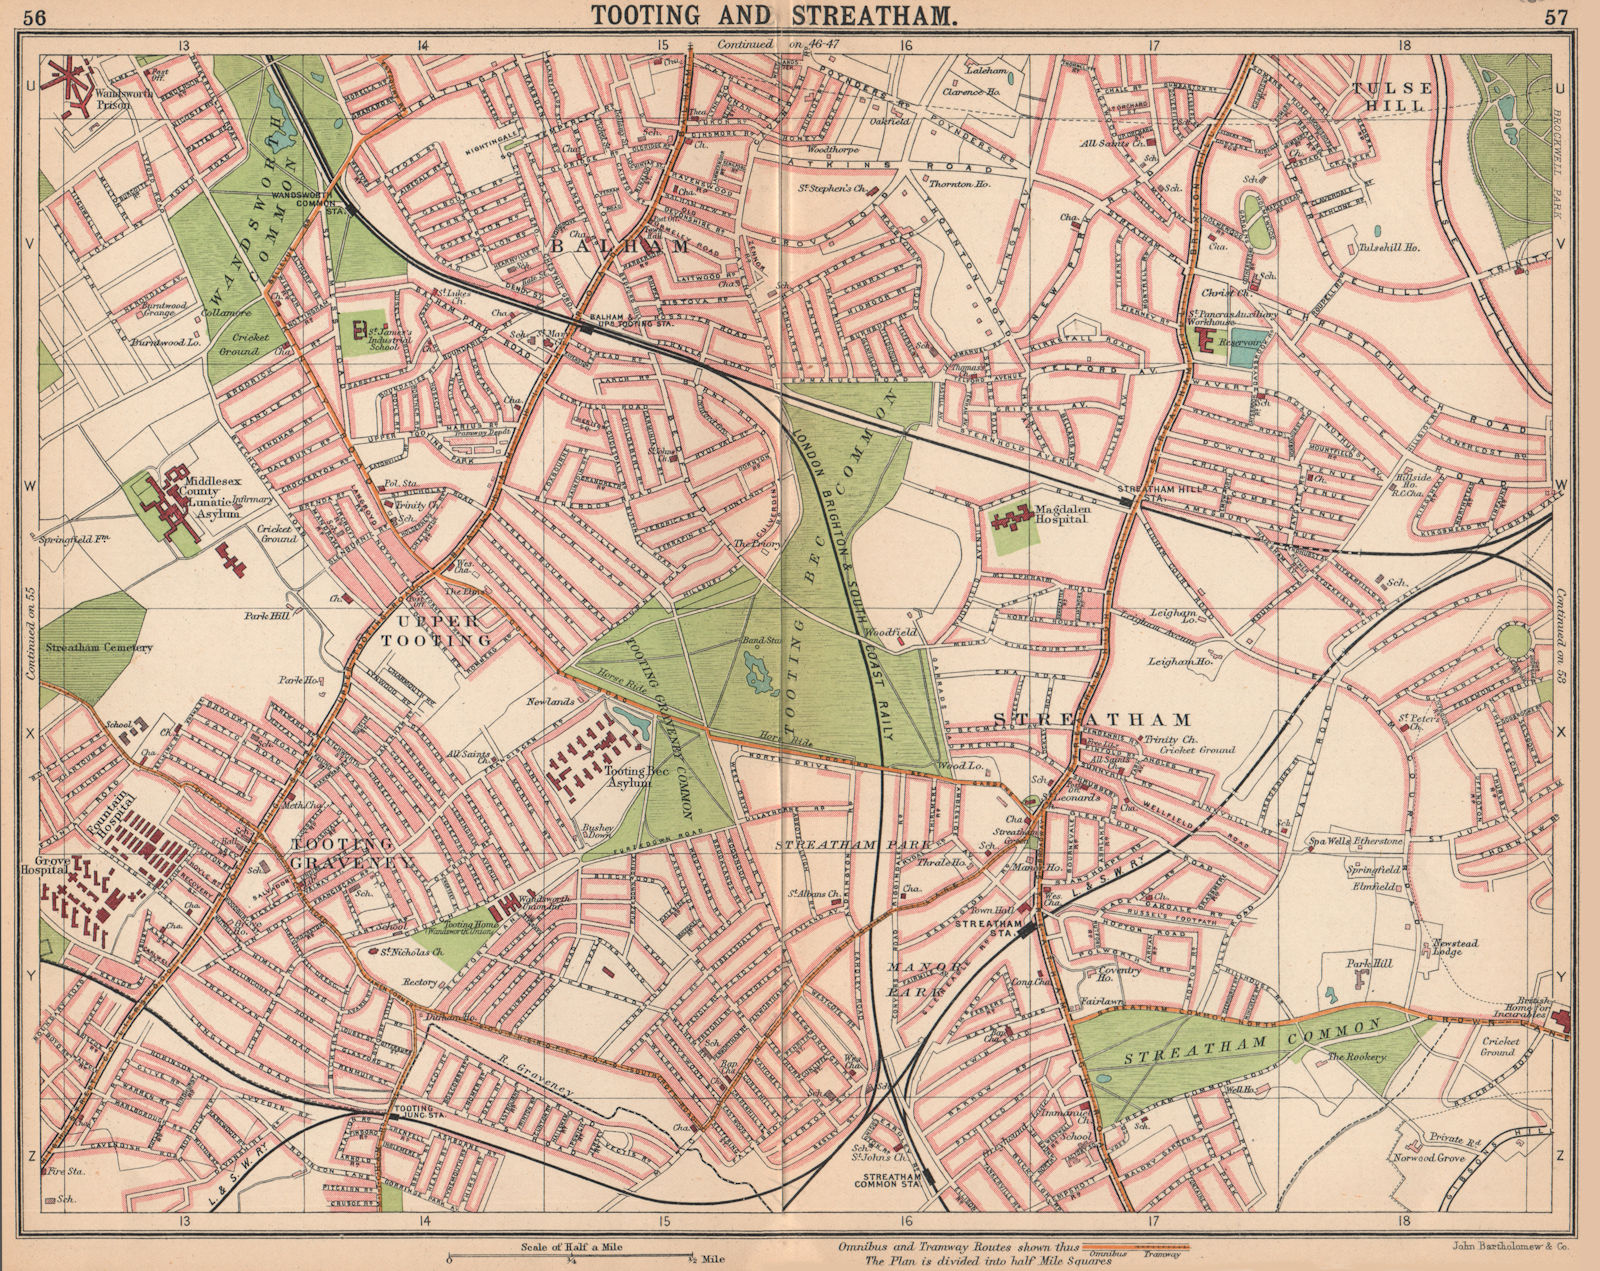 Associate Product LONDON S. Tooting Streatham Balham Tulse Hill. Bus & tram routes 1913 old map